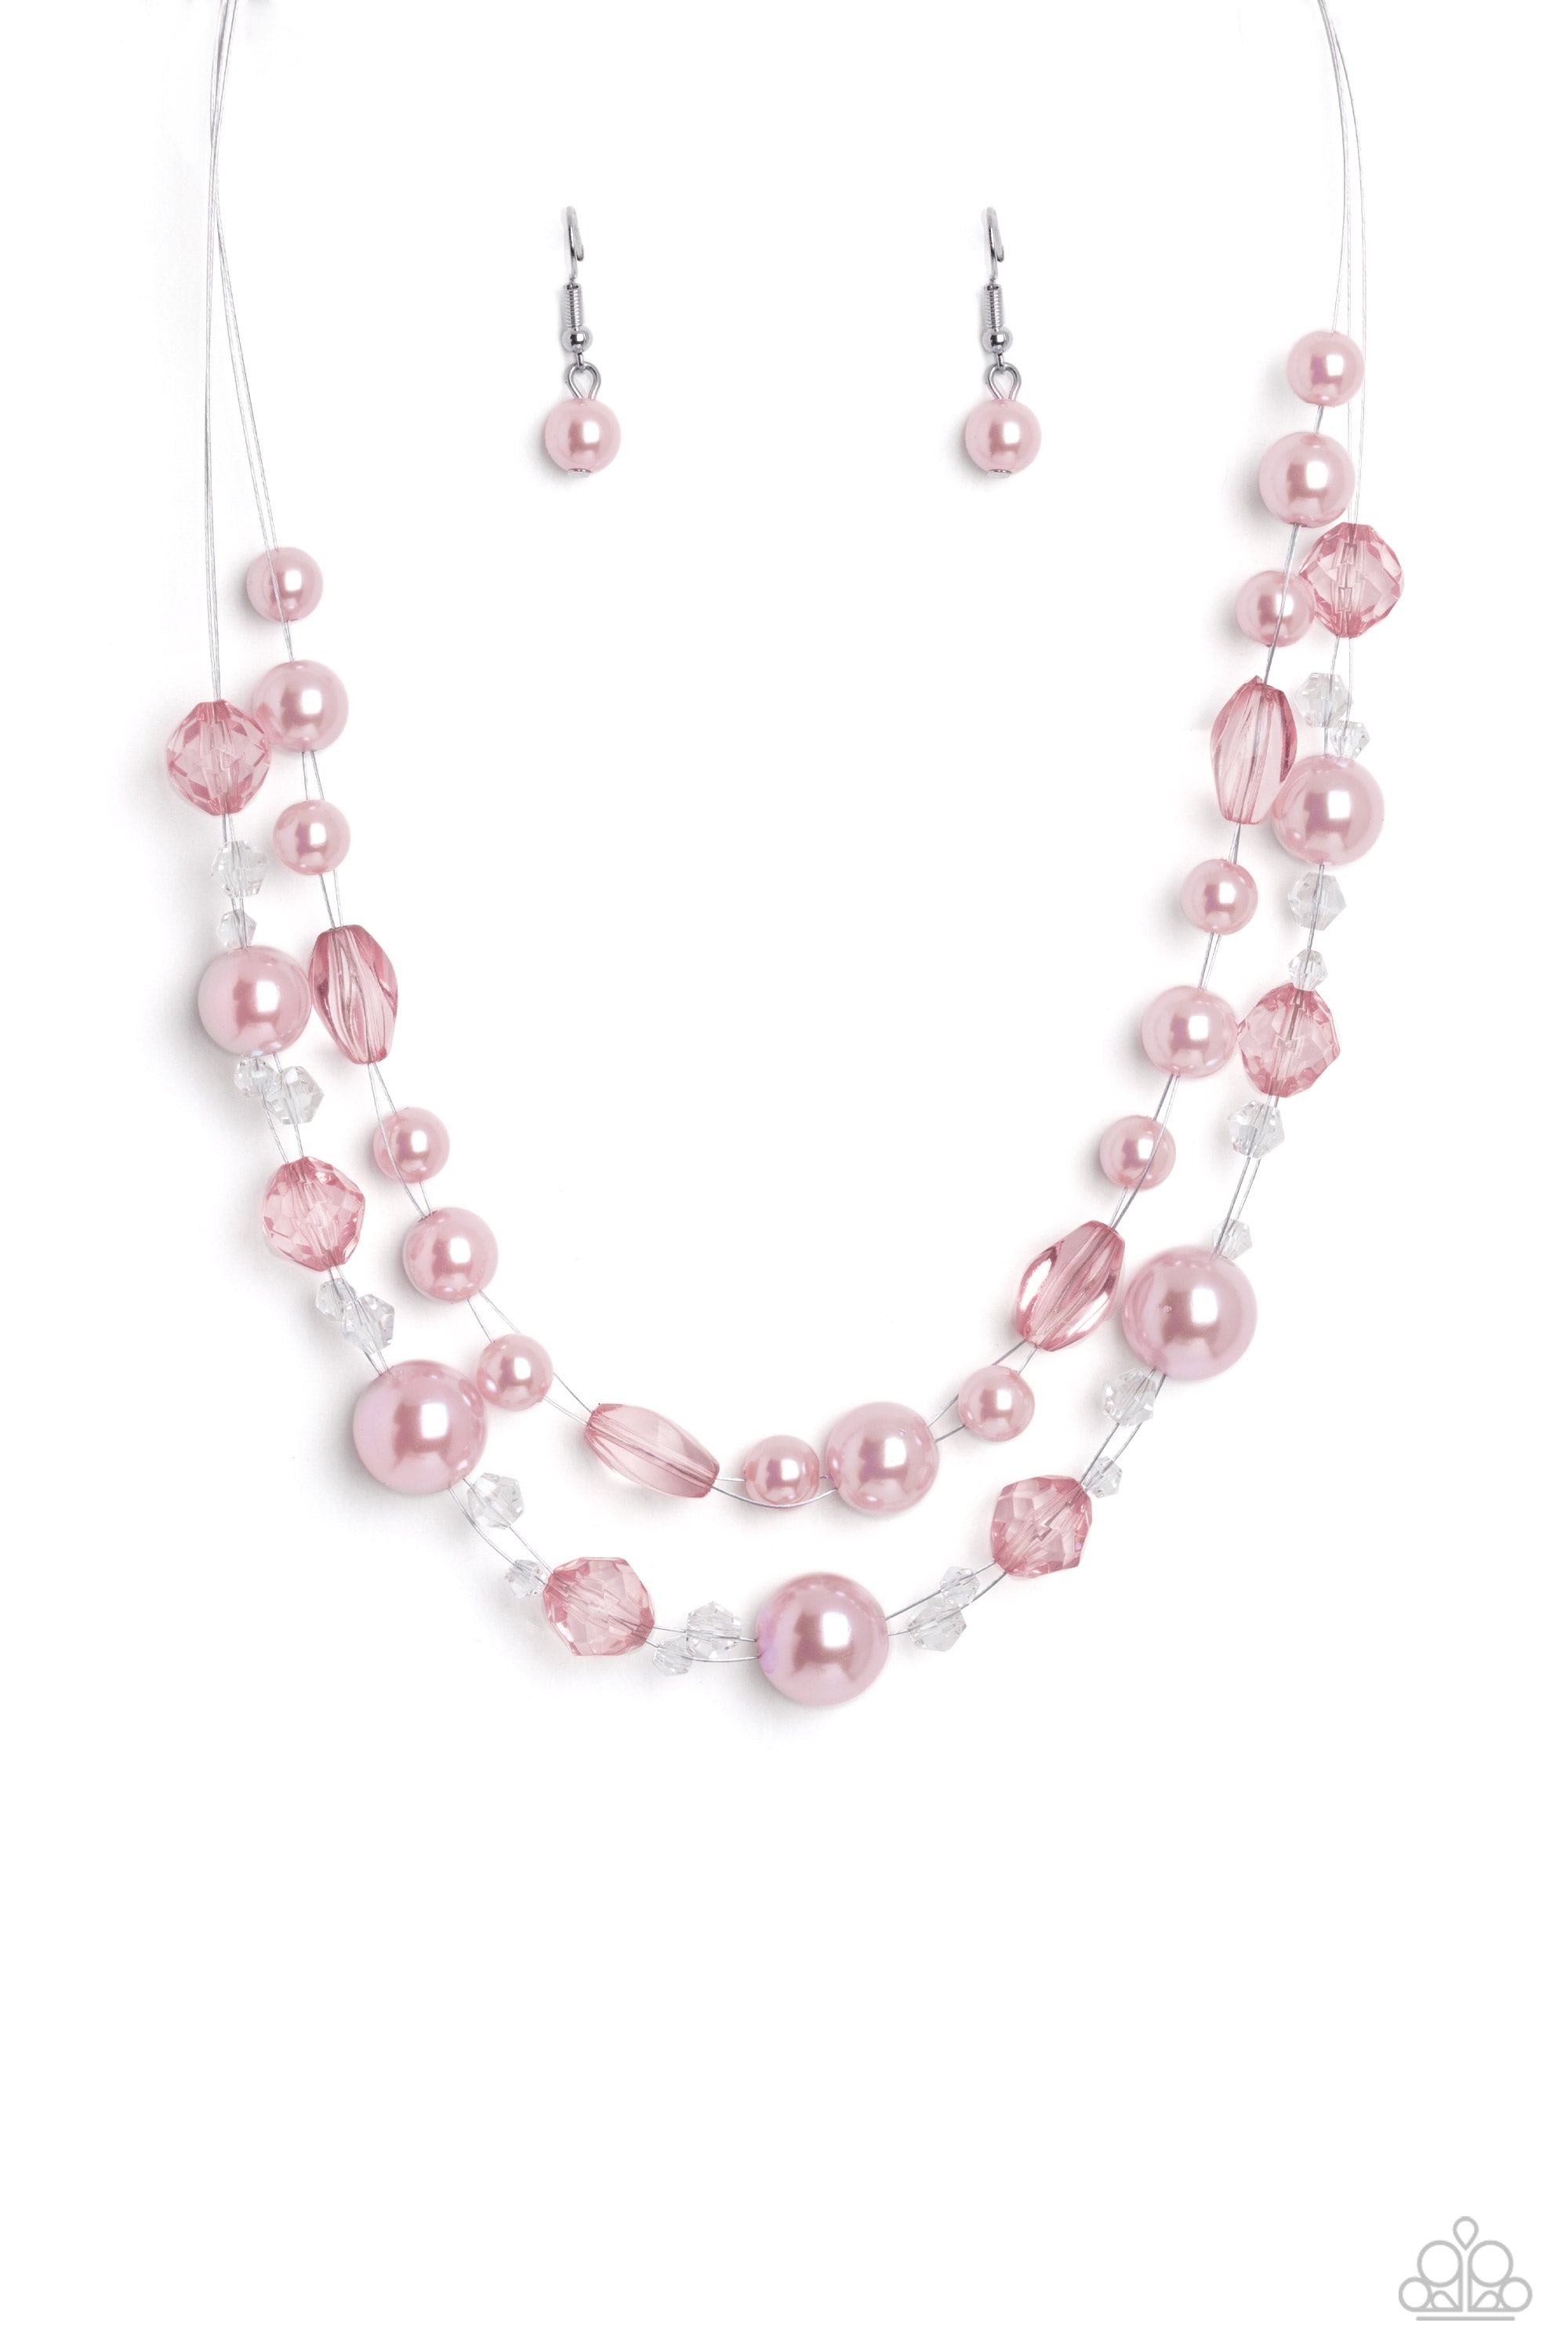 PAPARAZZI HEIR-HEADED - WHITE PEARLS NECKLACE – Bee's Bling Bash